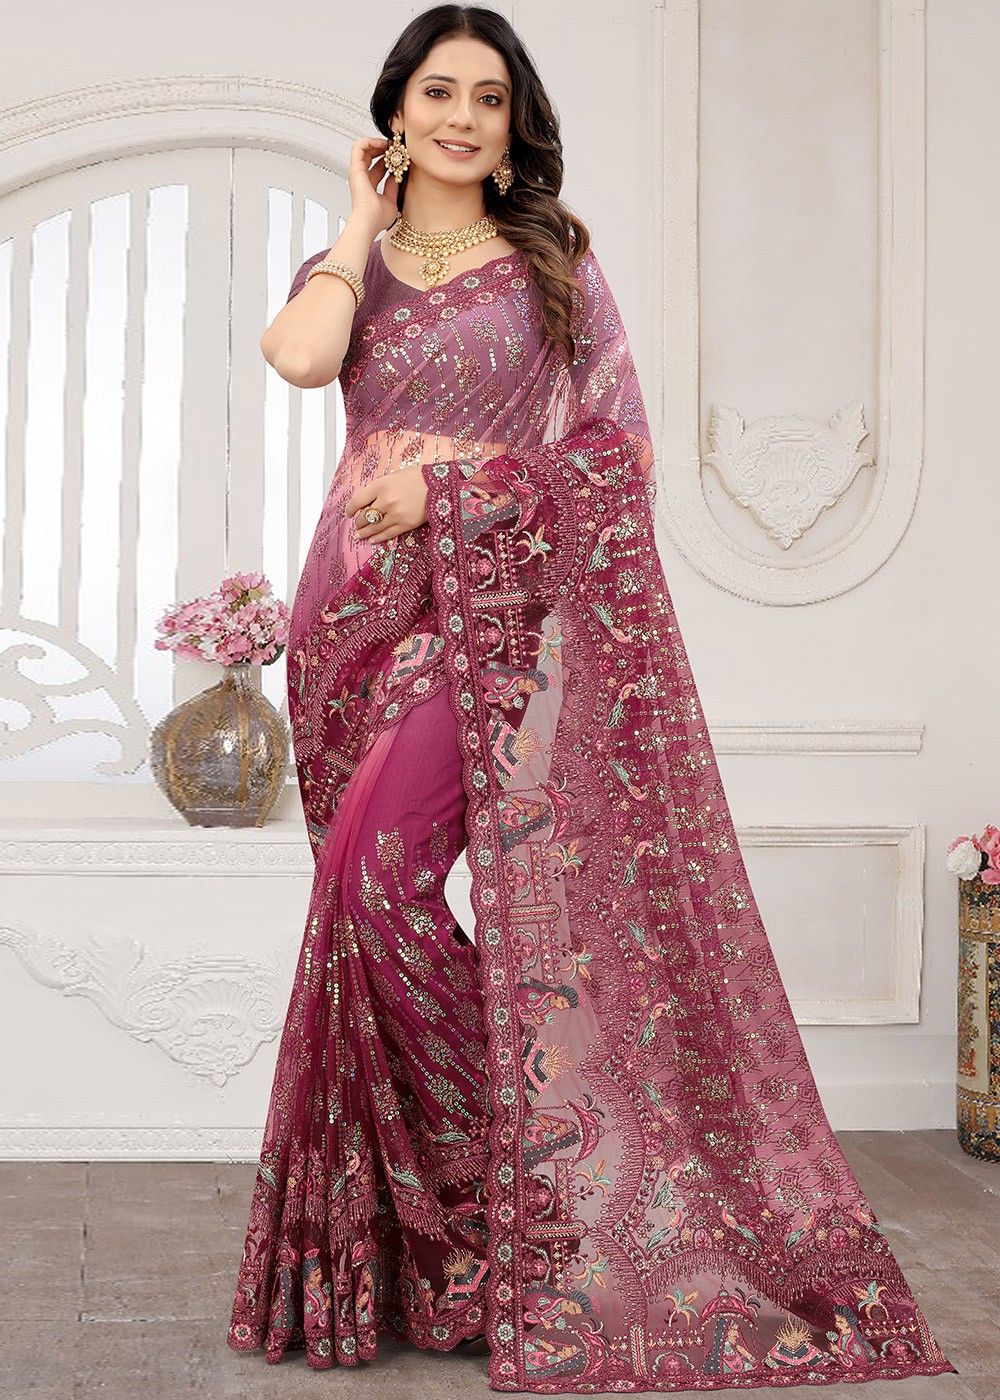 Best selling embroidery saree on meesho